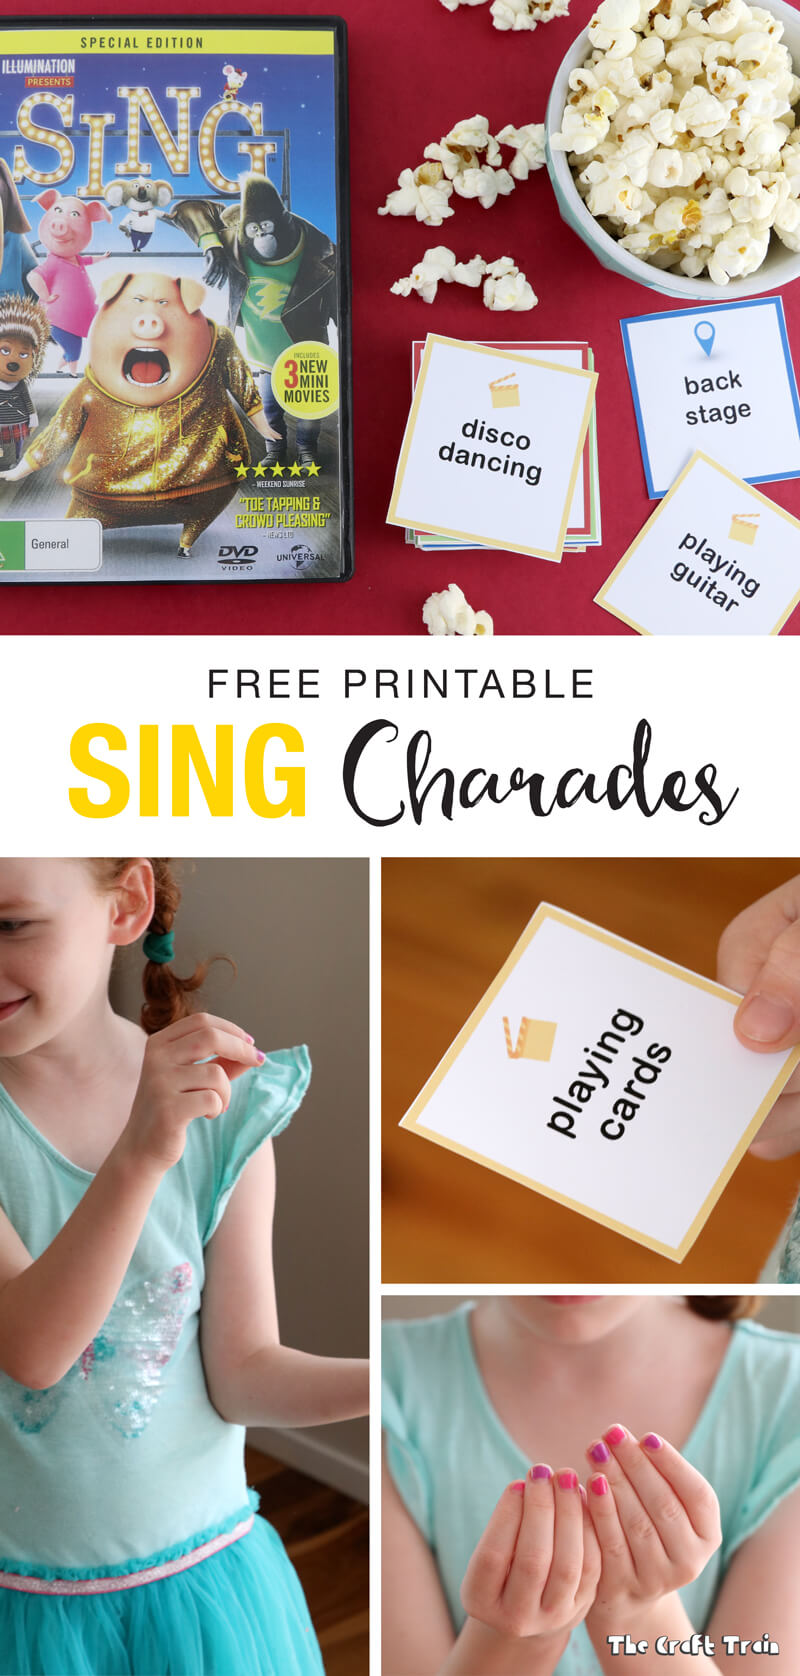 A free set of printable charades cards inspired by the movie SING, now on Blu-ray and DVD. Lots of big belly-laughs guaranteed! {sponsored}